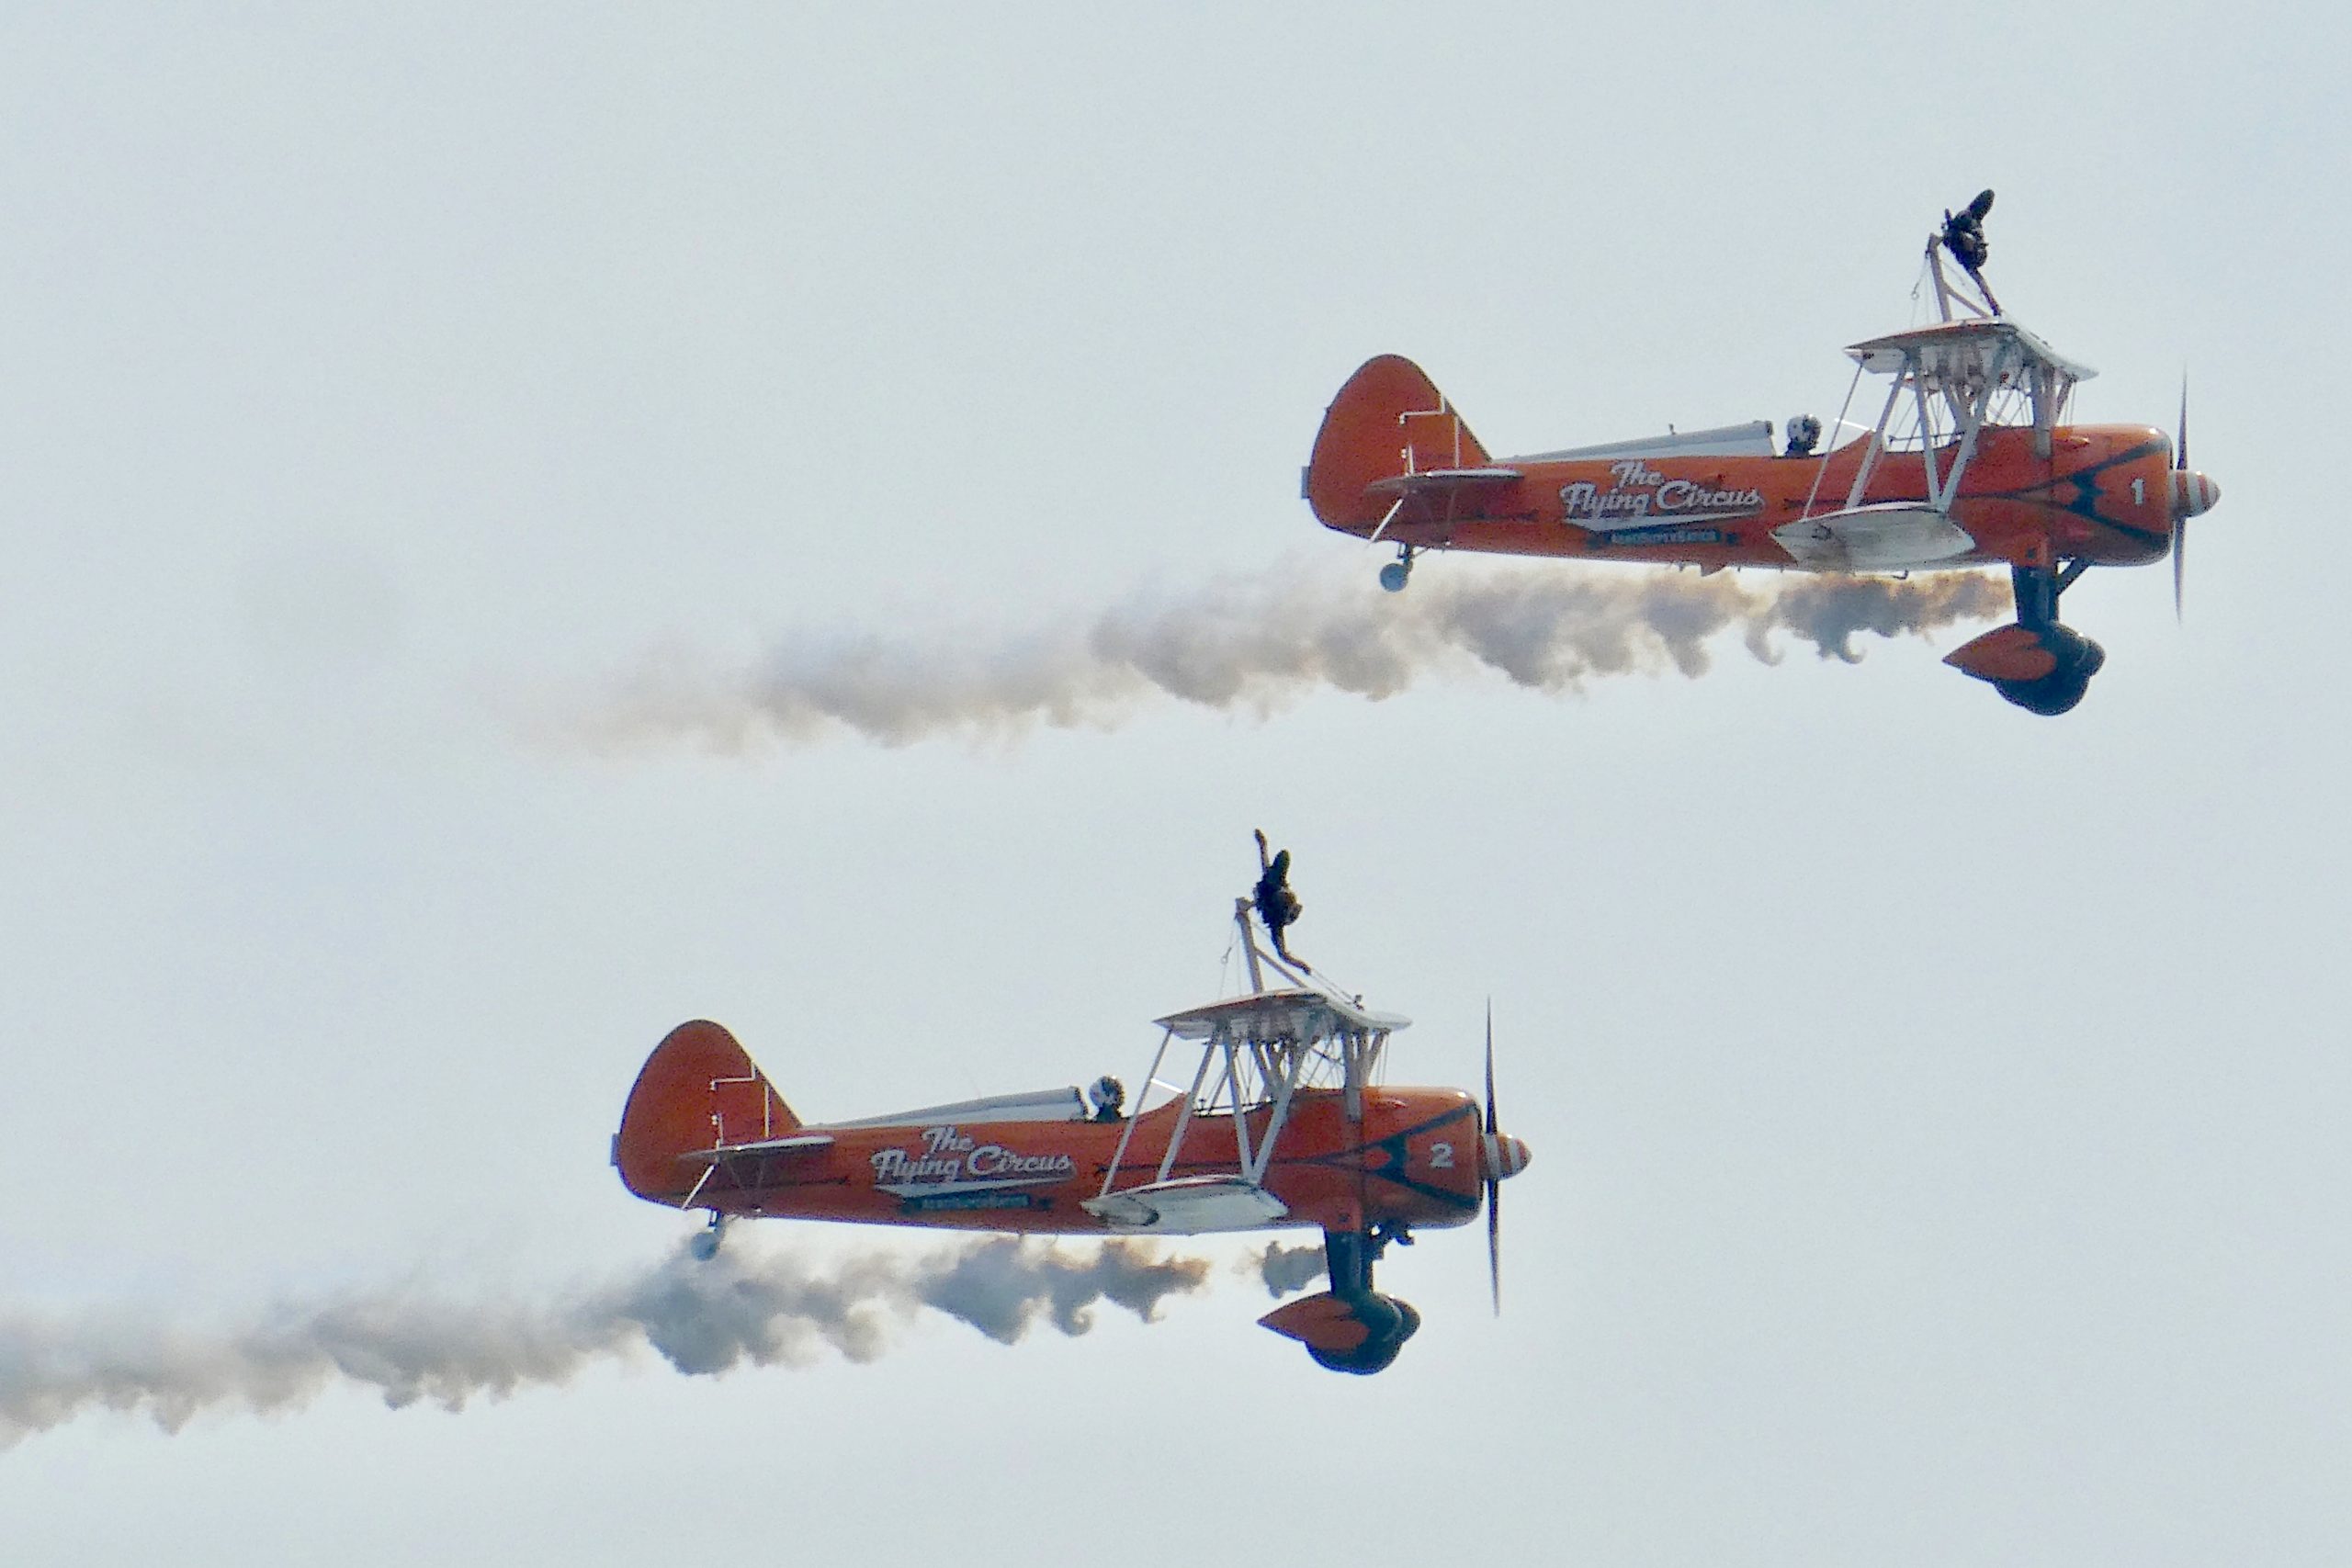 Stuntpeople on top of a plane demonstrating trust in pilots